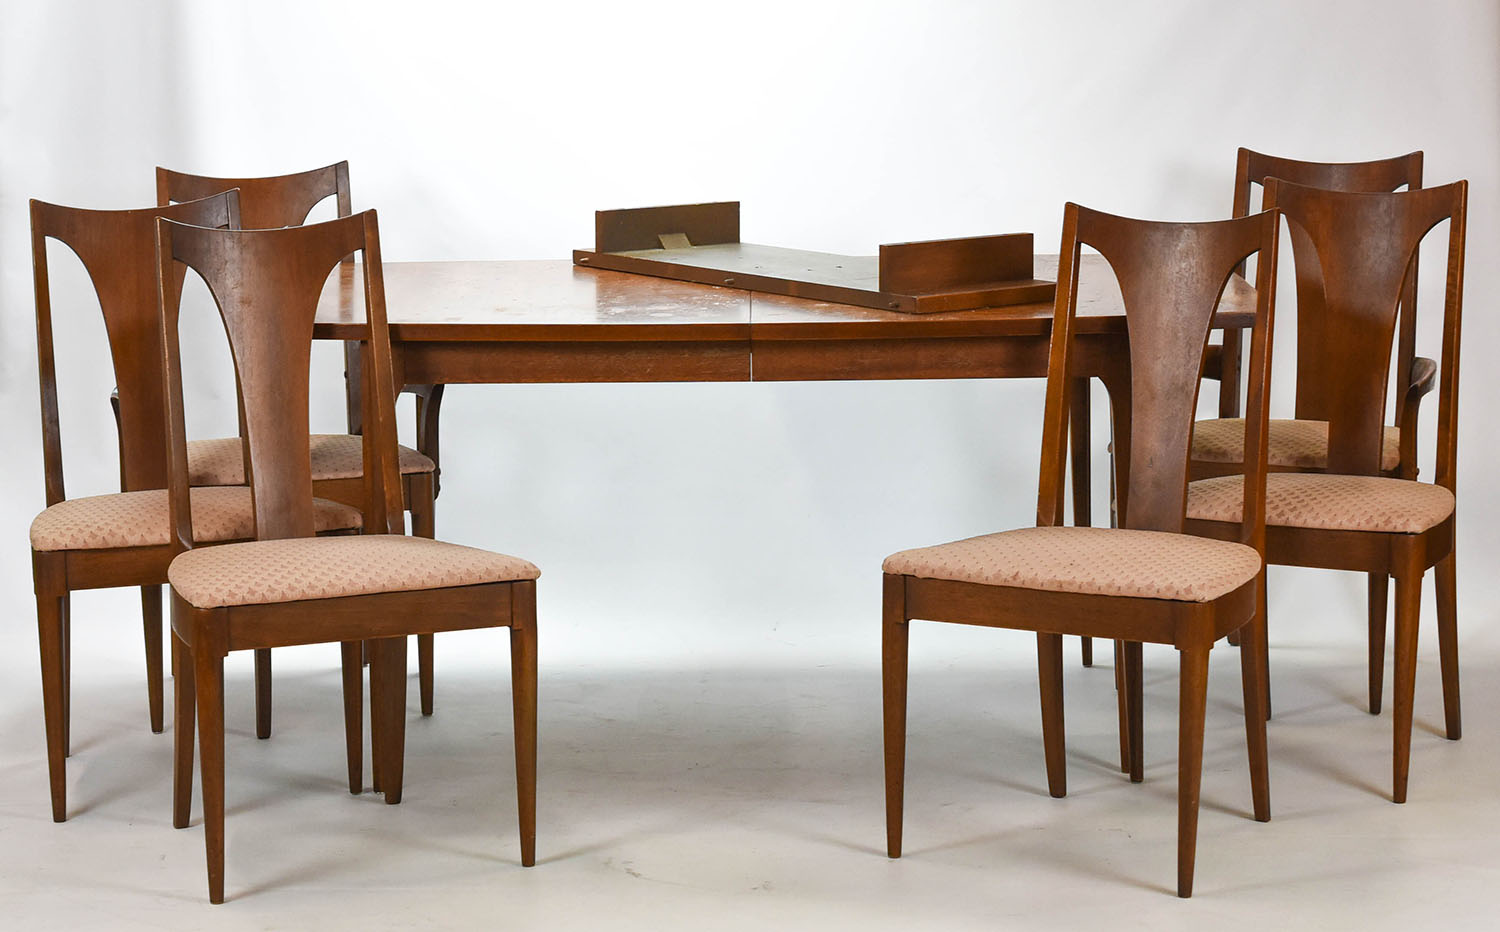 Brasilia Broyhill Premier Dining Room Table/6 Chairs